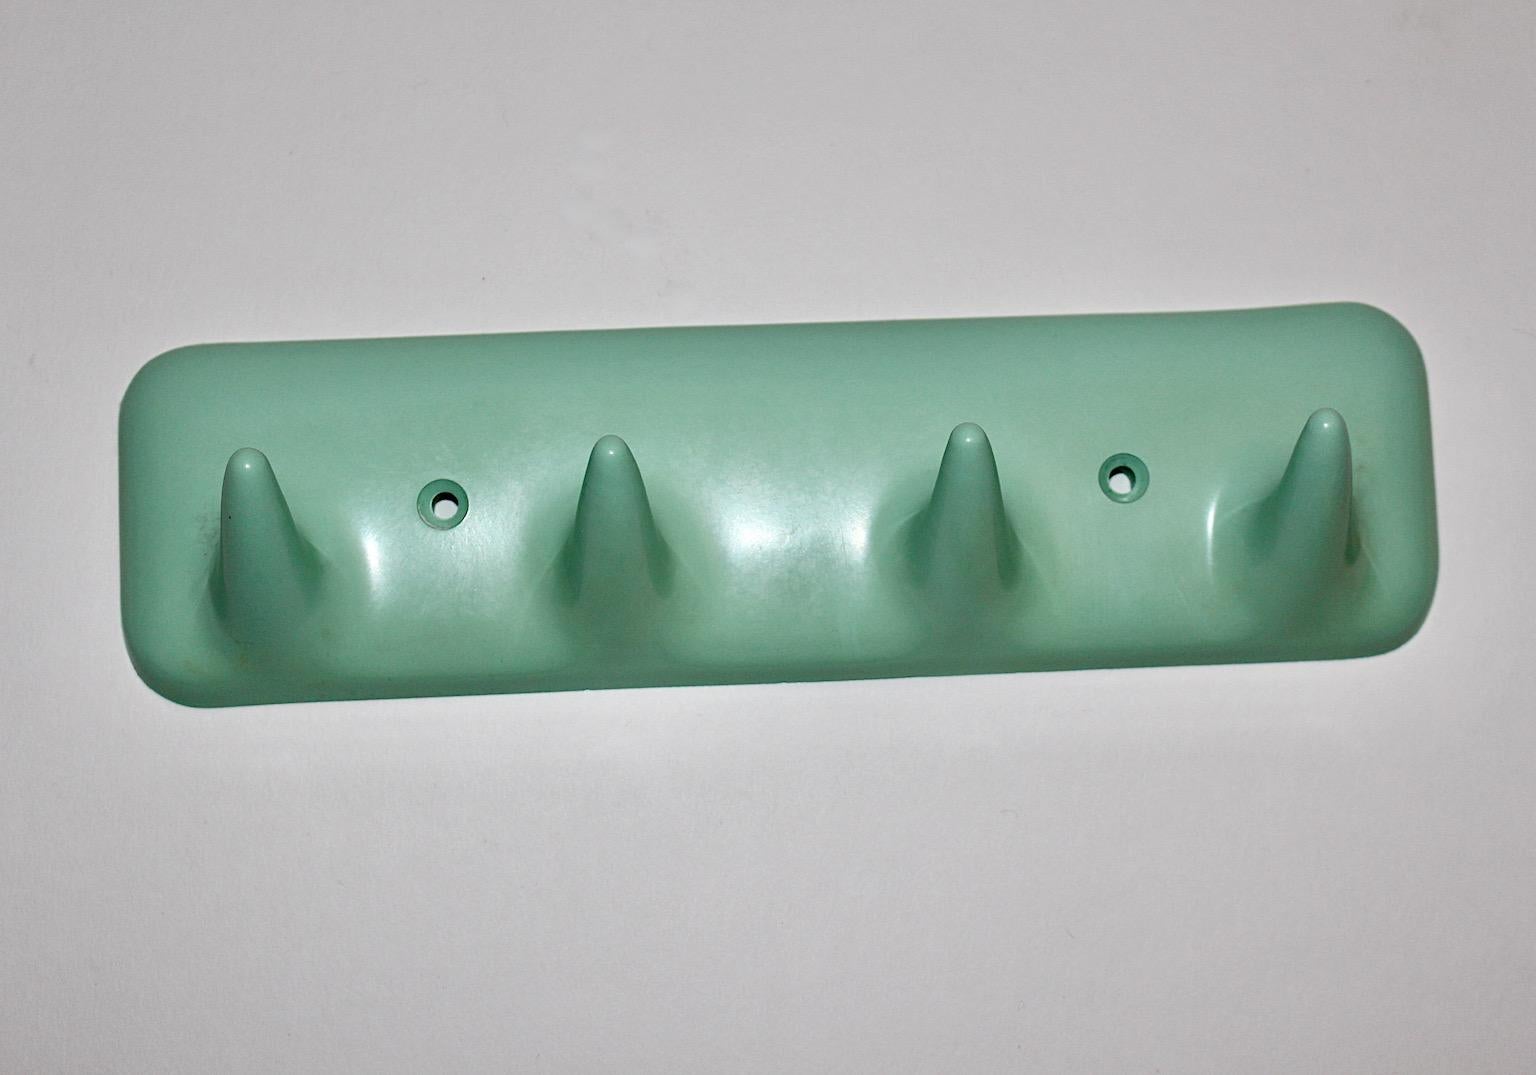 Mid-Century Modern vintage coat rack or wall hook from plastic designed and manufactured in Italy 1950s.
The green turquoise rail with 4 slightly curved hooks, which is easy to fix at the wall.
Stamped with CM Mod. Sesia brevettato Made in